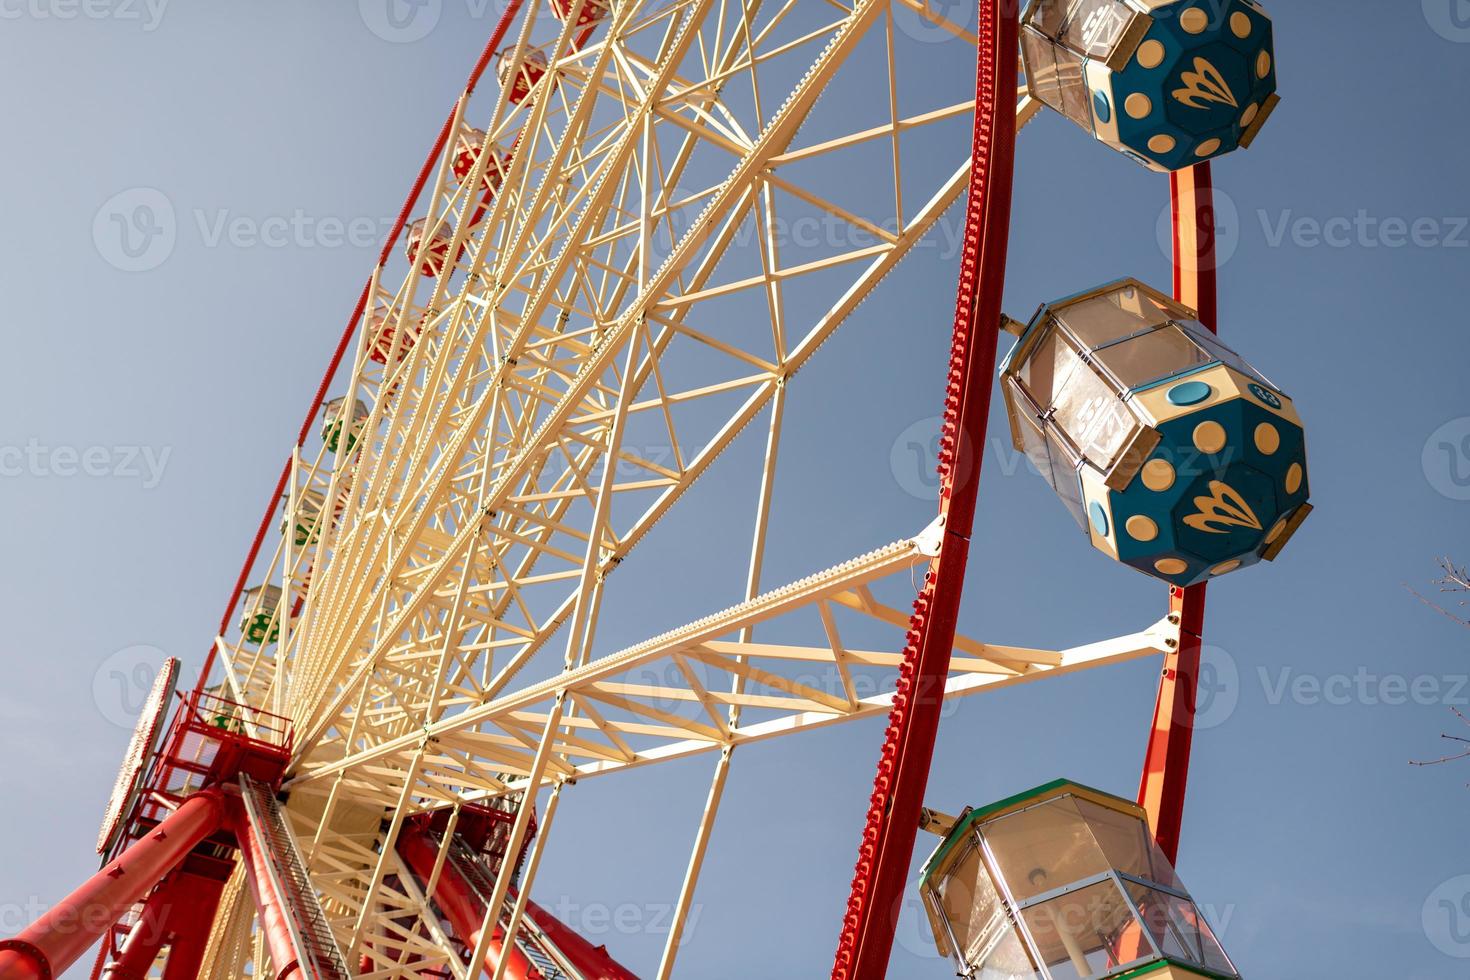 Round ferris wheel spins fast at colorful day photo